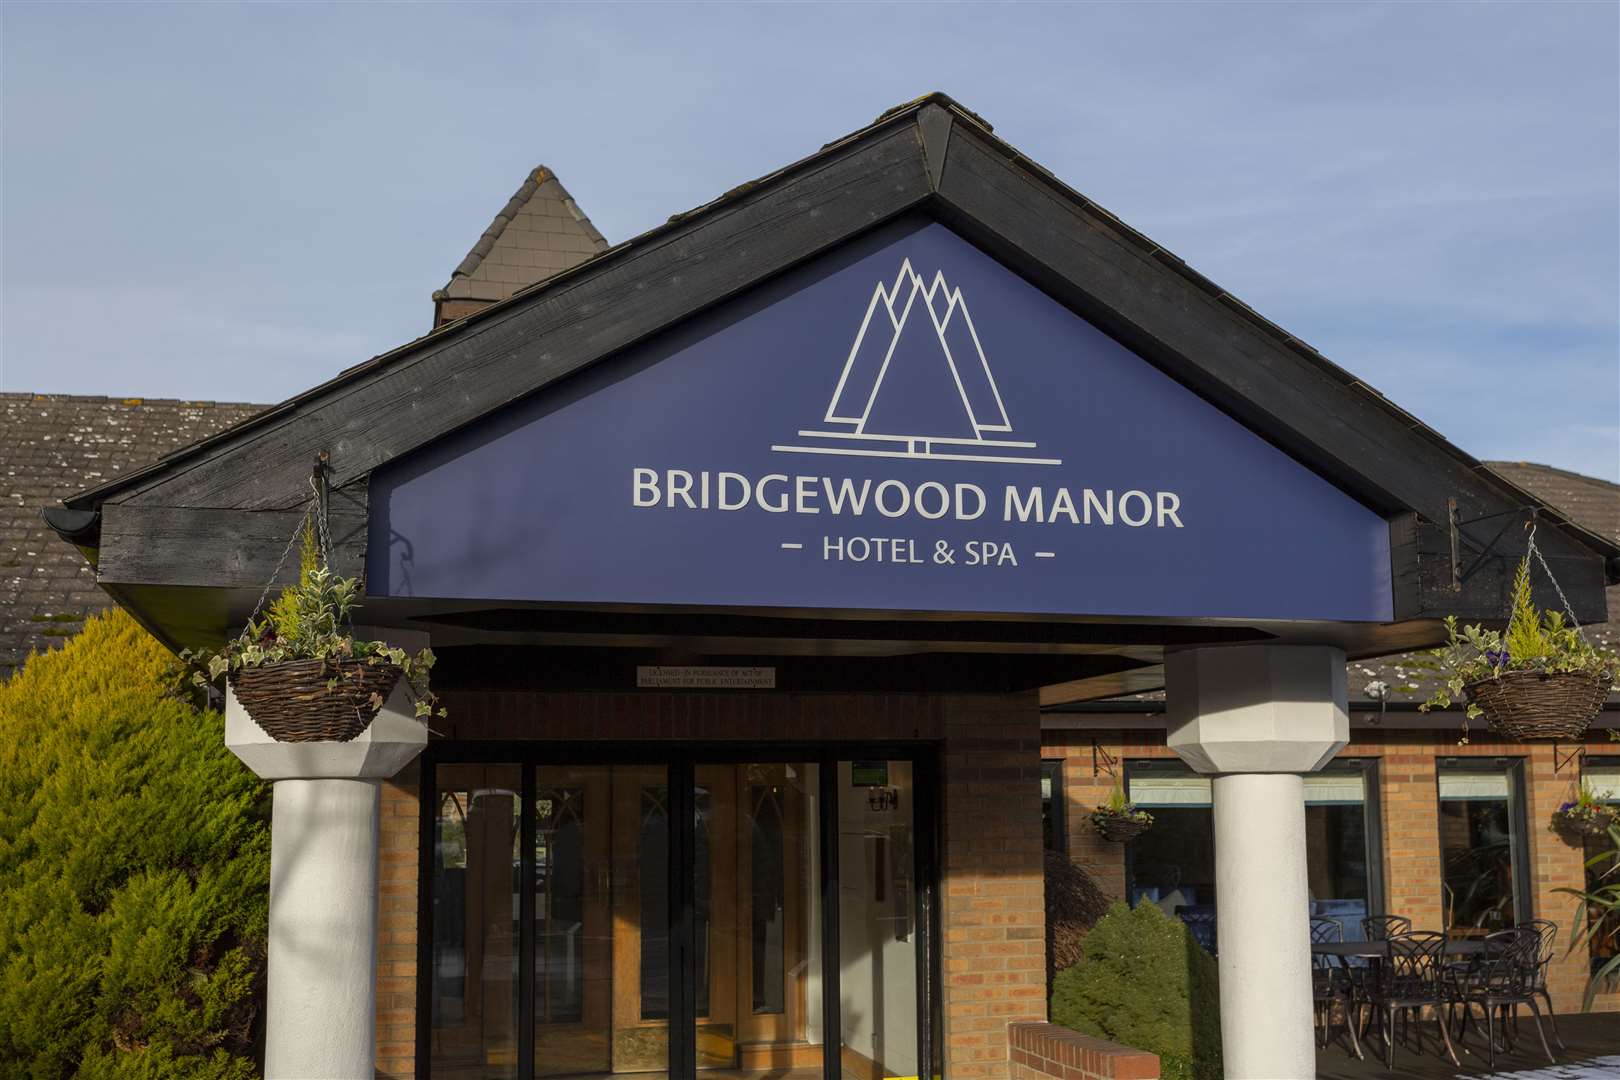 Robert O'Reilly, of Birchington, had been hoping to stay two nights at the Bridgewood Manor Hotel in Chatham